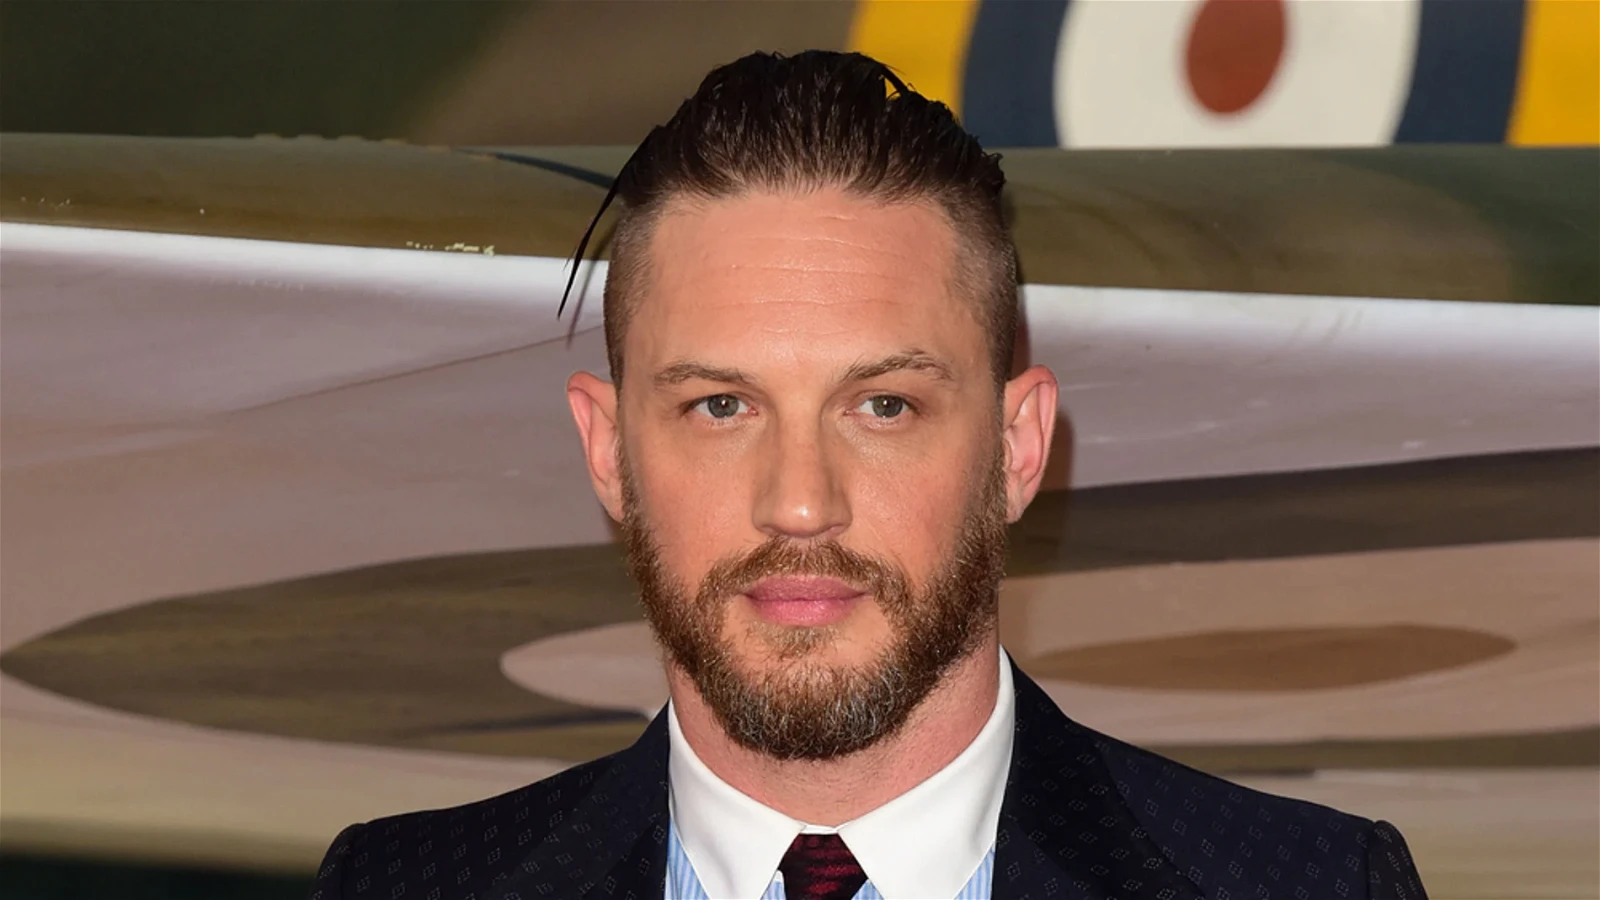 Tom Hardy is known for playing dark and formidable characters